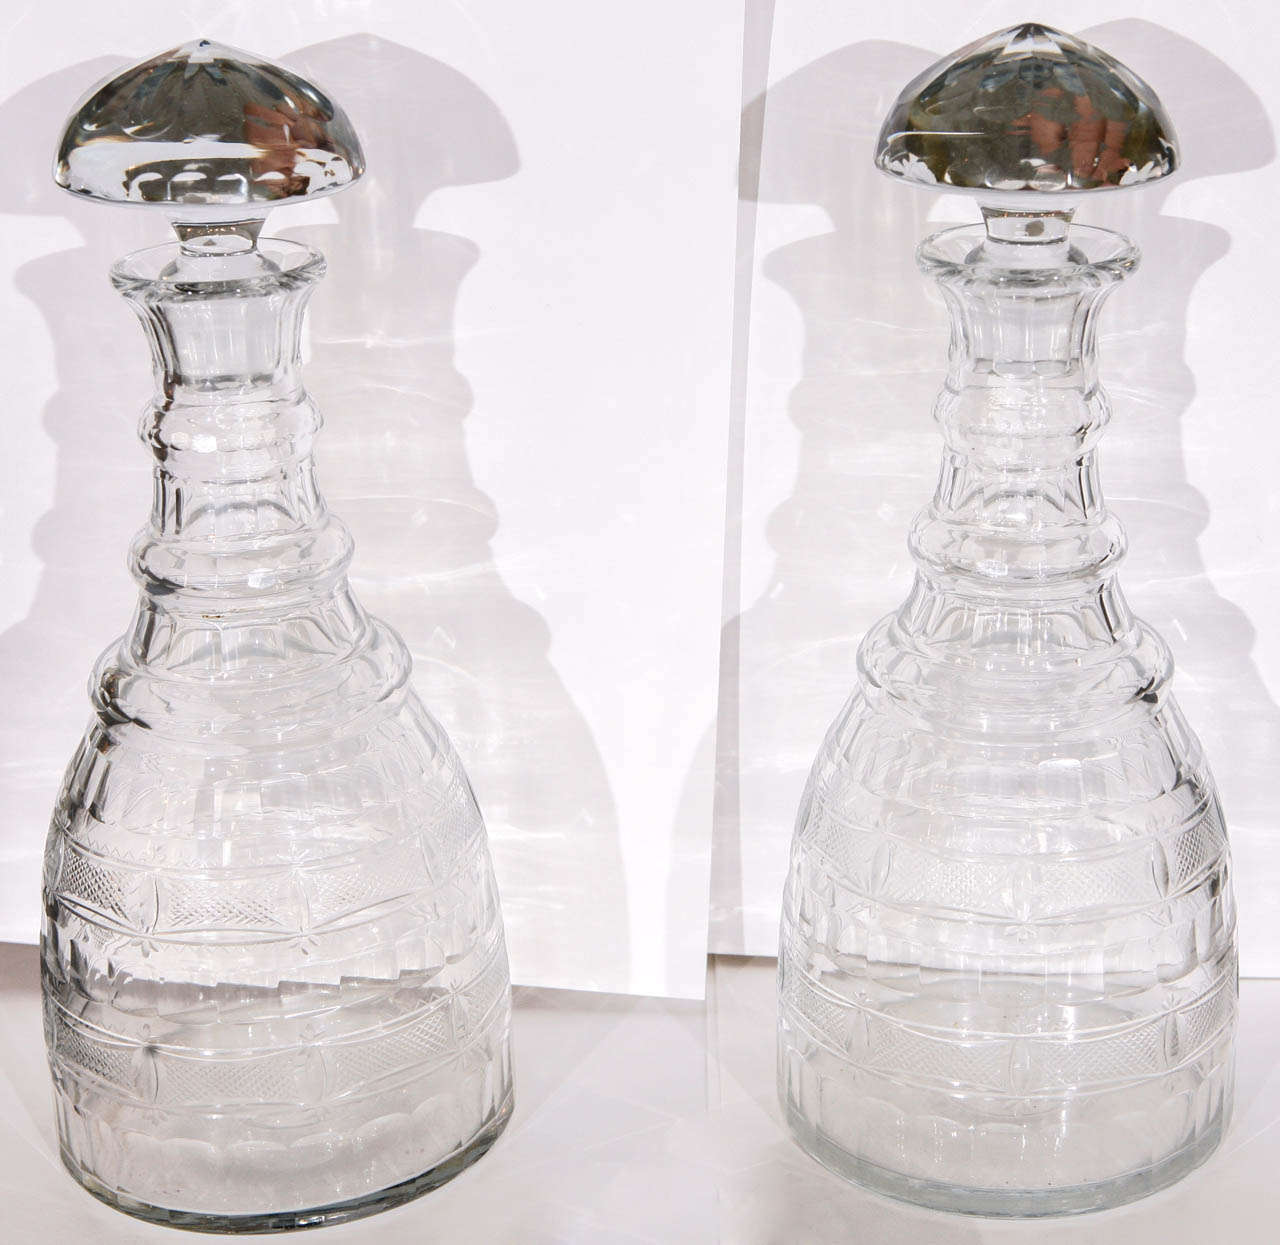 A Pair of Cut and Engraved Decanters with distinctive Mushroom Stoppers, England,
early 19th c.